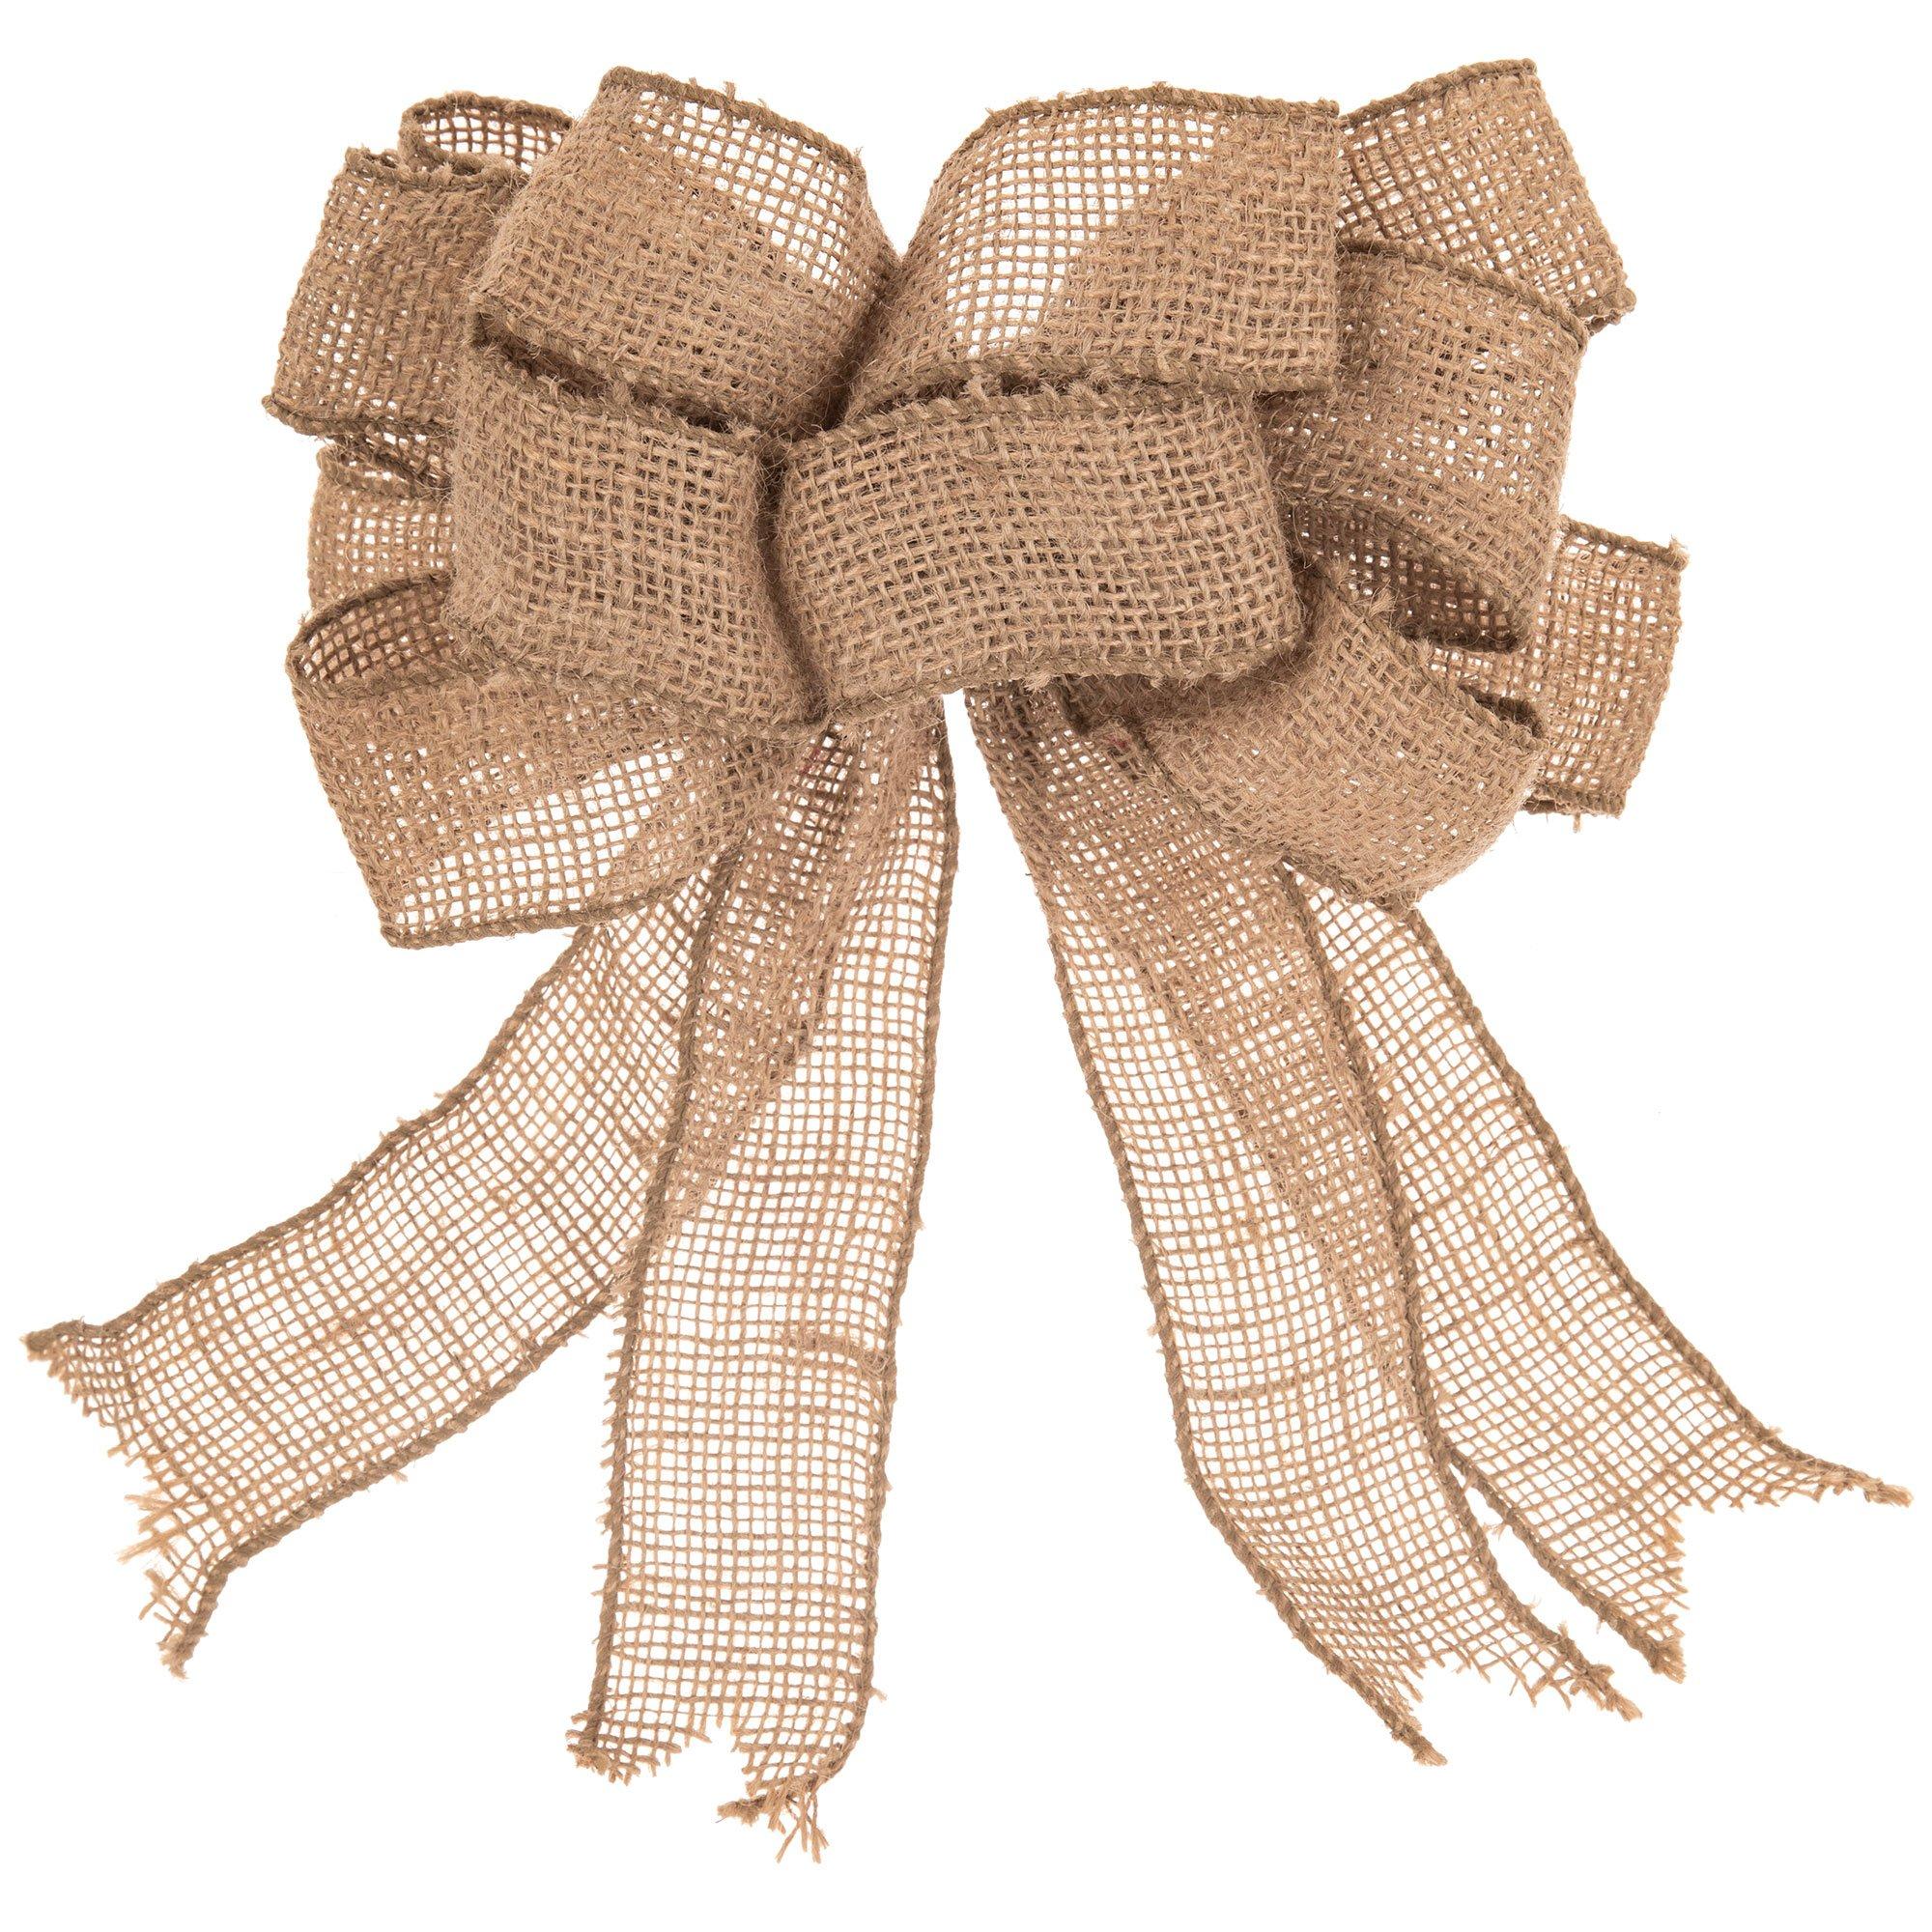 AIMUDI Natural Burlap Bows Rustic Gift Bows Christmas Wreath Bows 4 Inch  Handmade Small Burlap Farmhouse Bows for Crafts Gift Wrapping Christmas  Tree